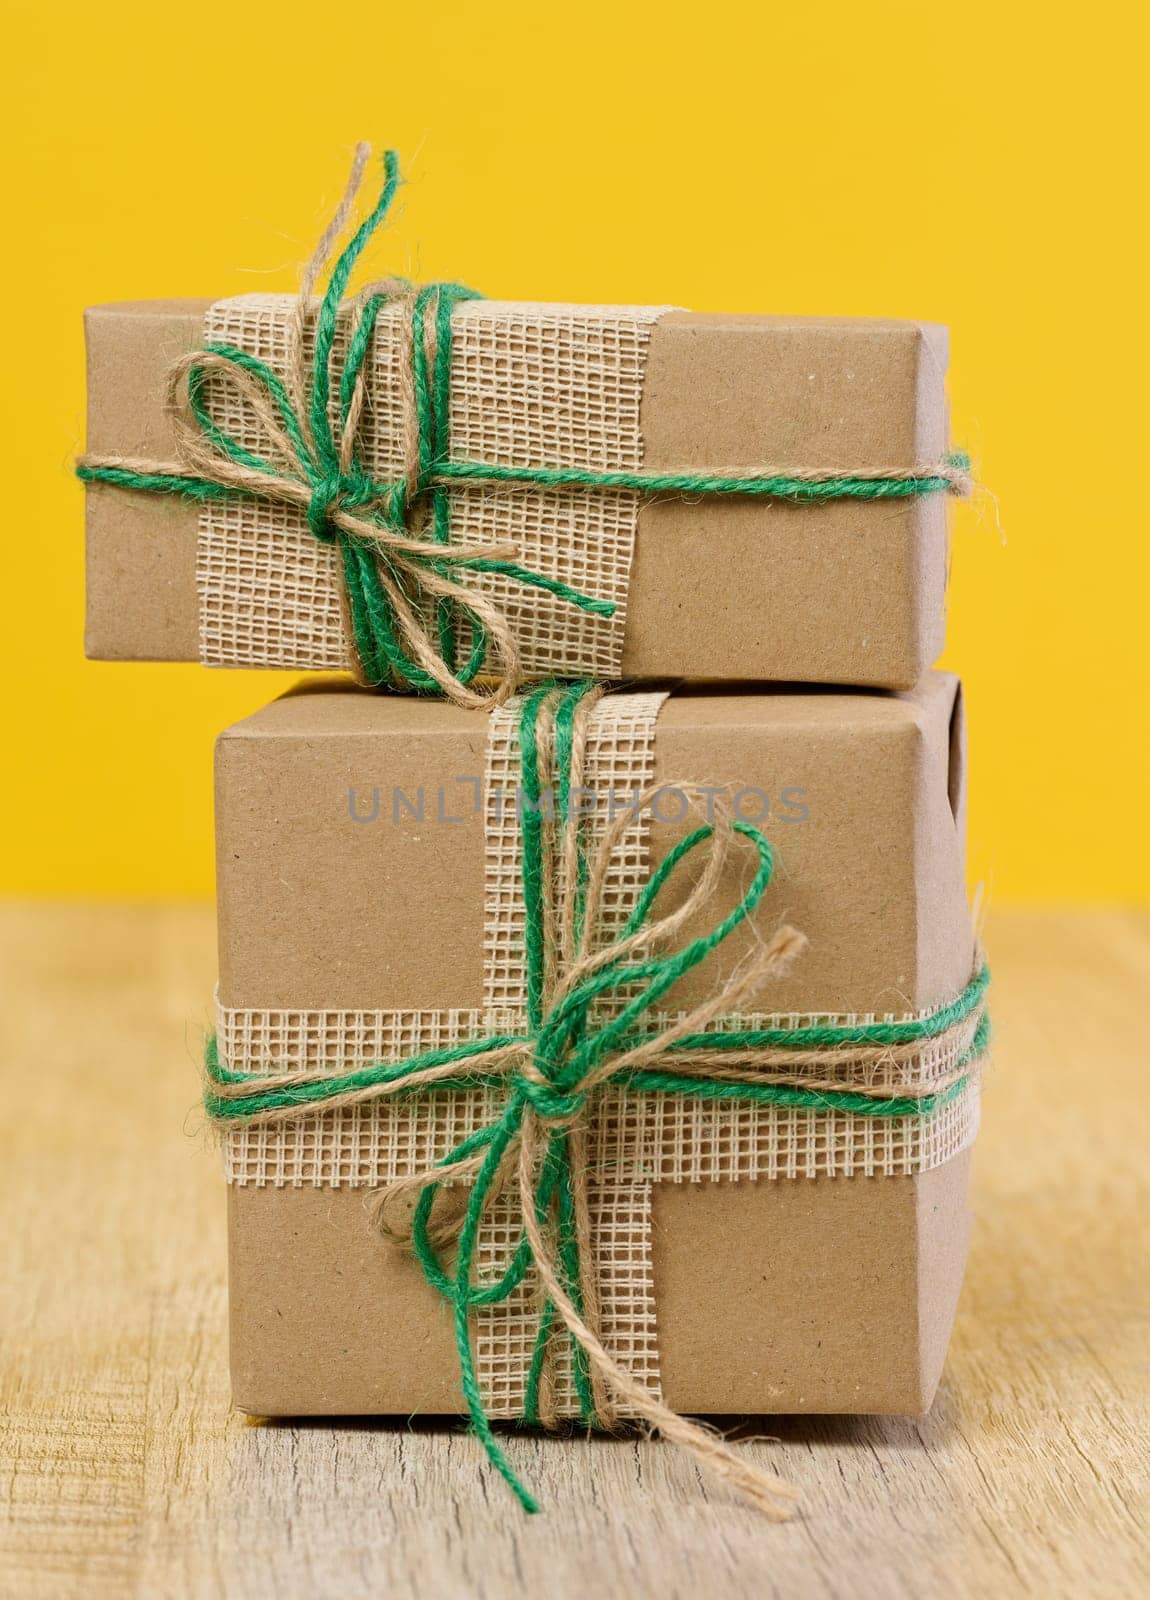 The box is packed in brown craft paper and tied with a rope on a beige background, gift by ndanko